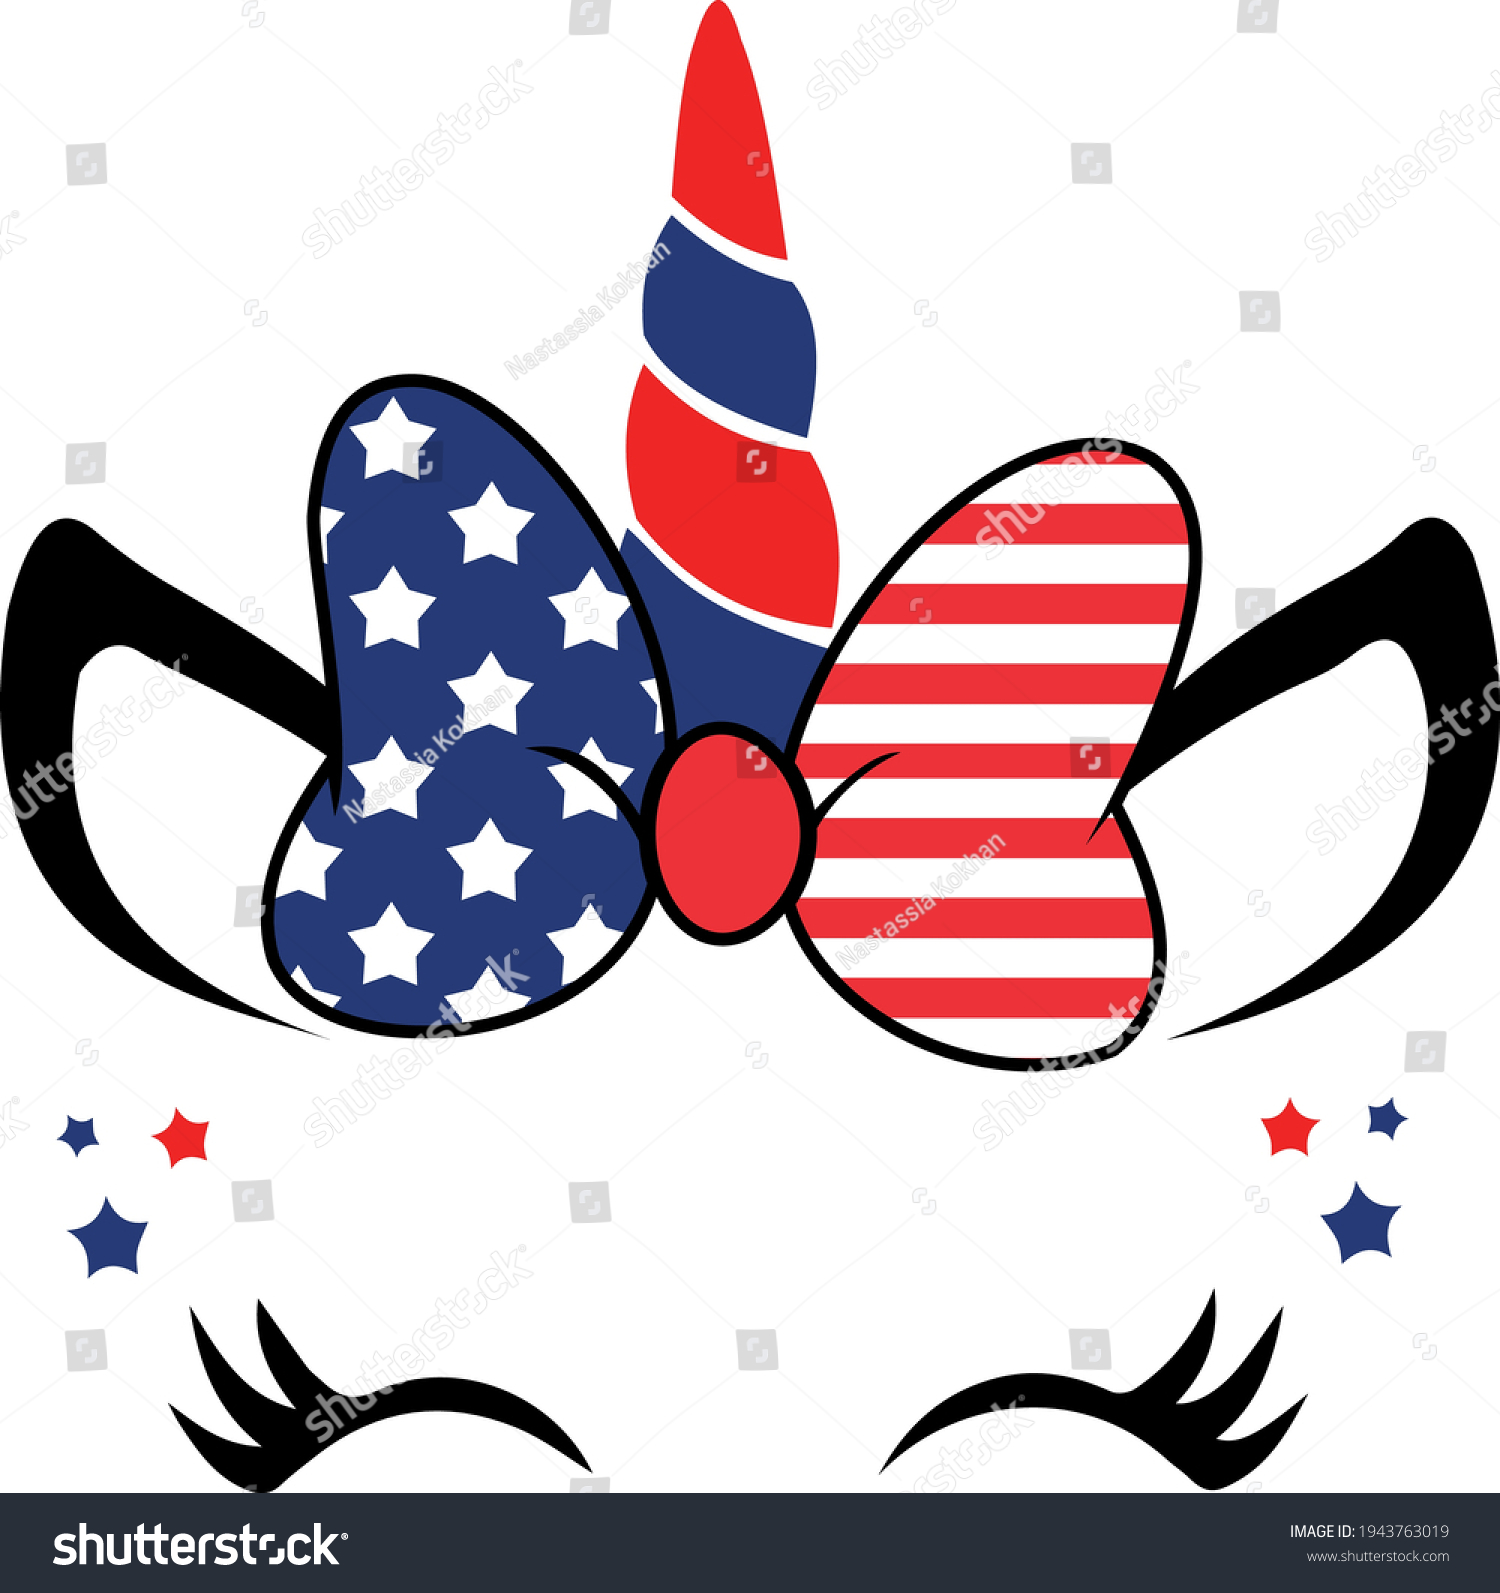 SVG of 4th of July Svg vector Illustration isolated on white background. Independence day party decor. 4th of July Unicorn svg for design shirt and scrapbooking.Unicorn with stars and stripes. svg